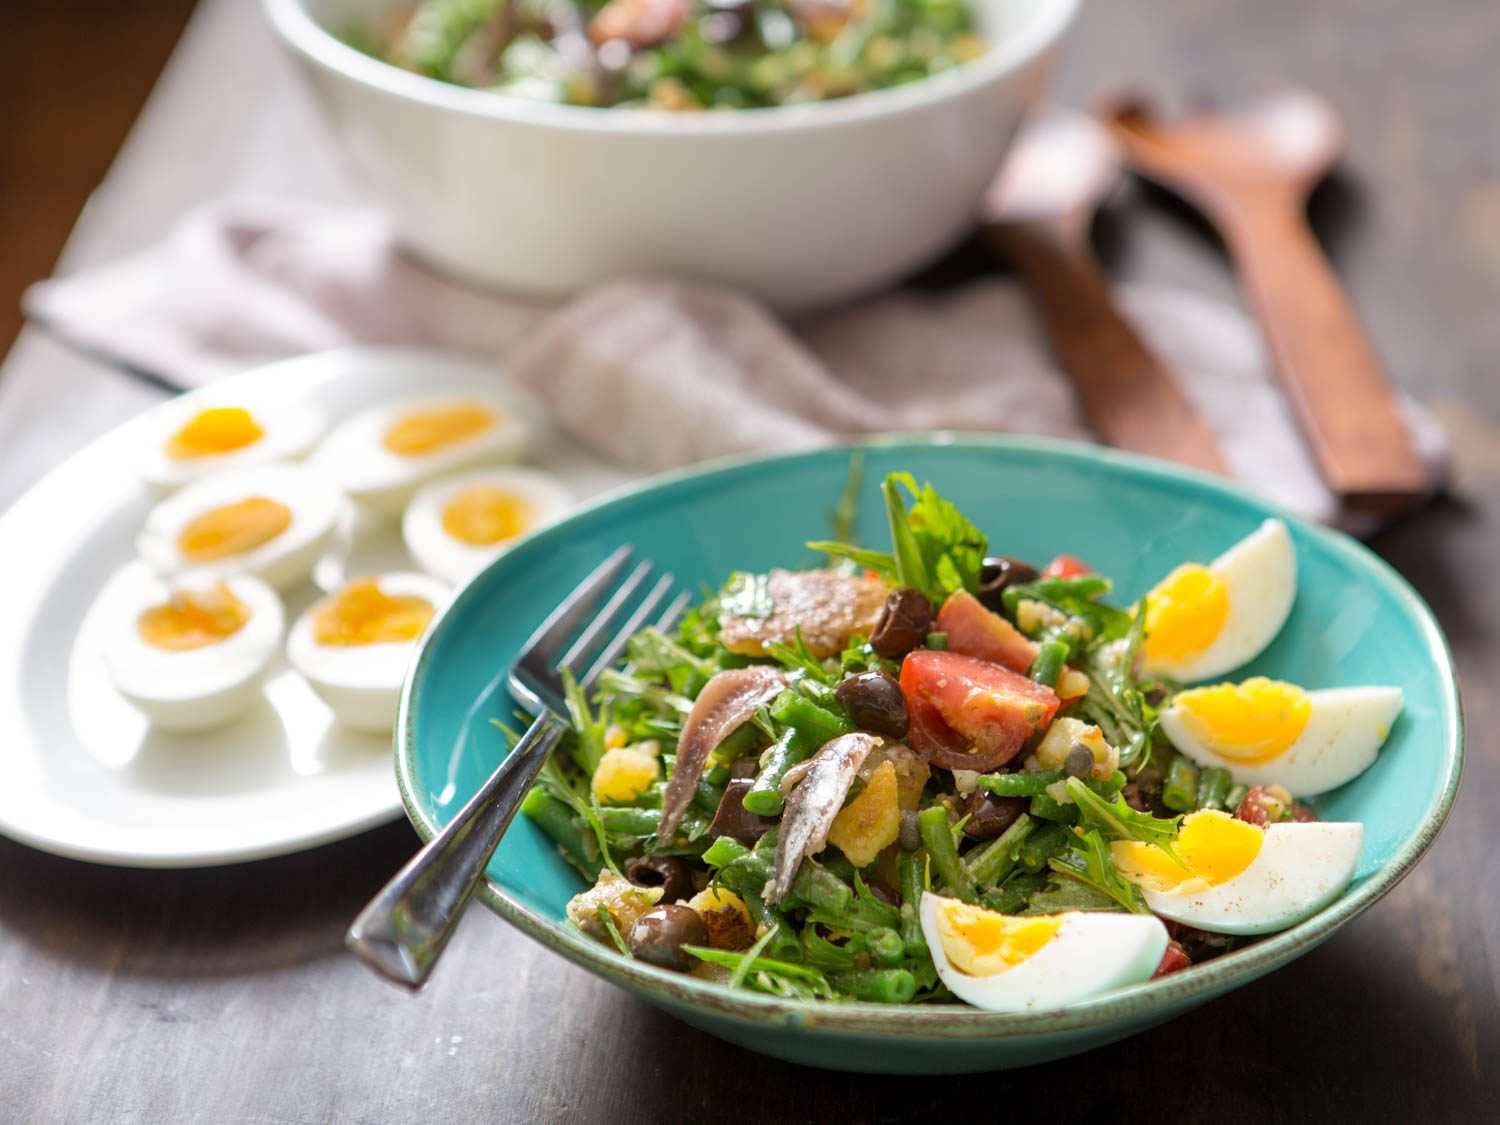 Nicoise salad on serving plate with eggs and salad in the background.